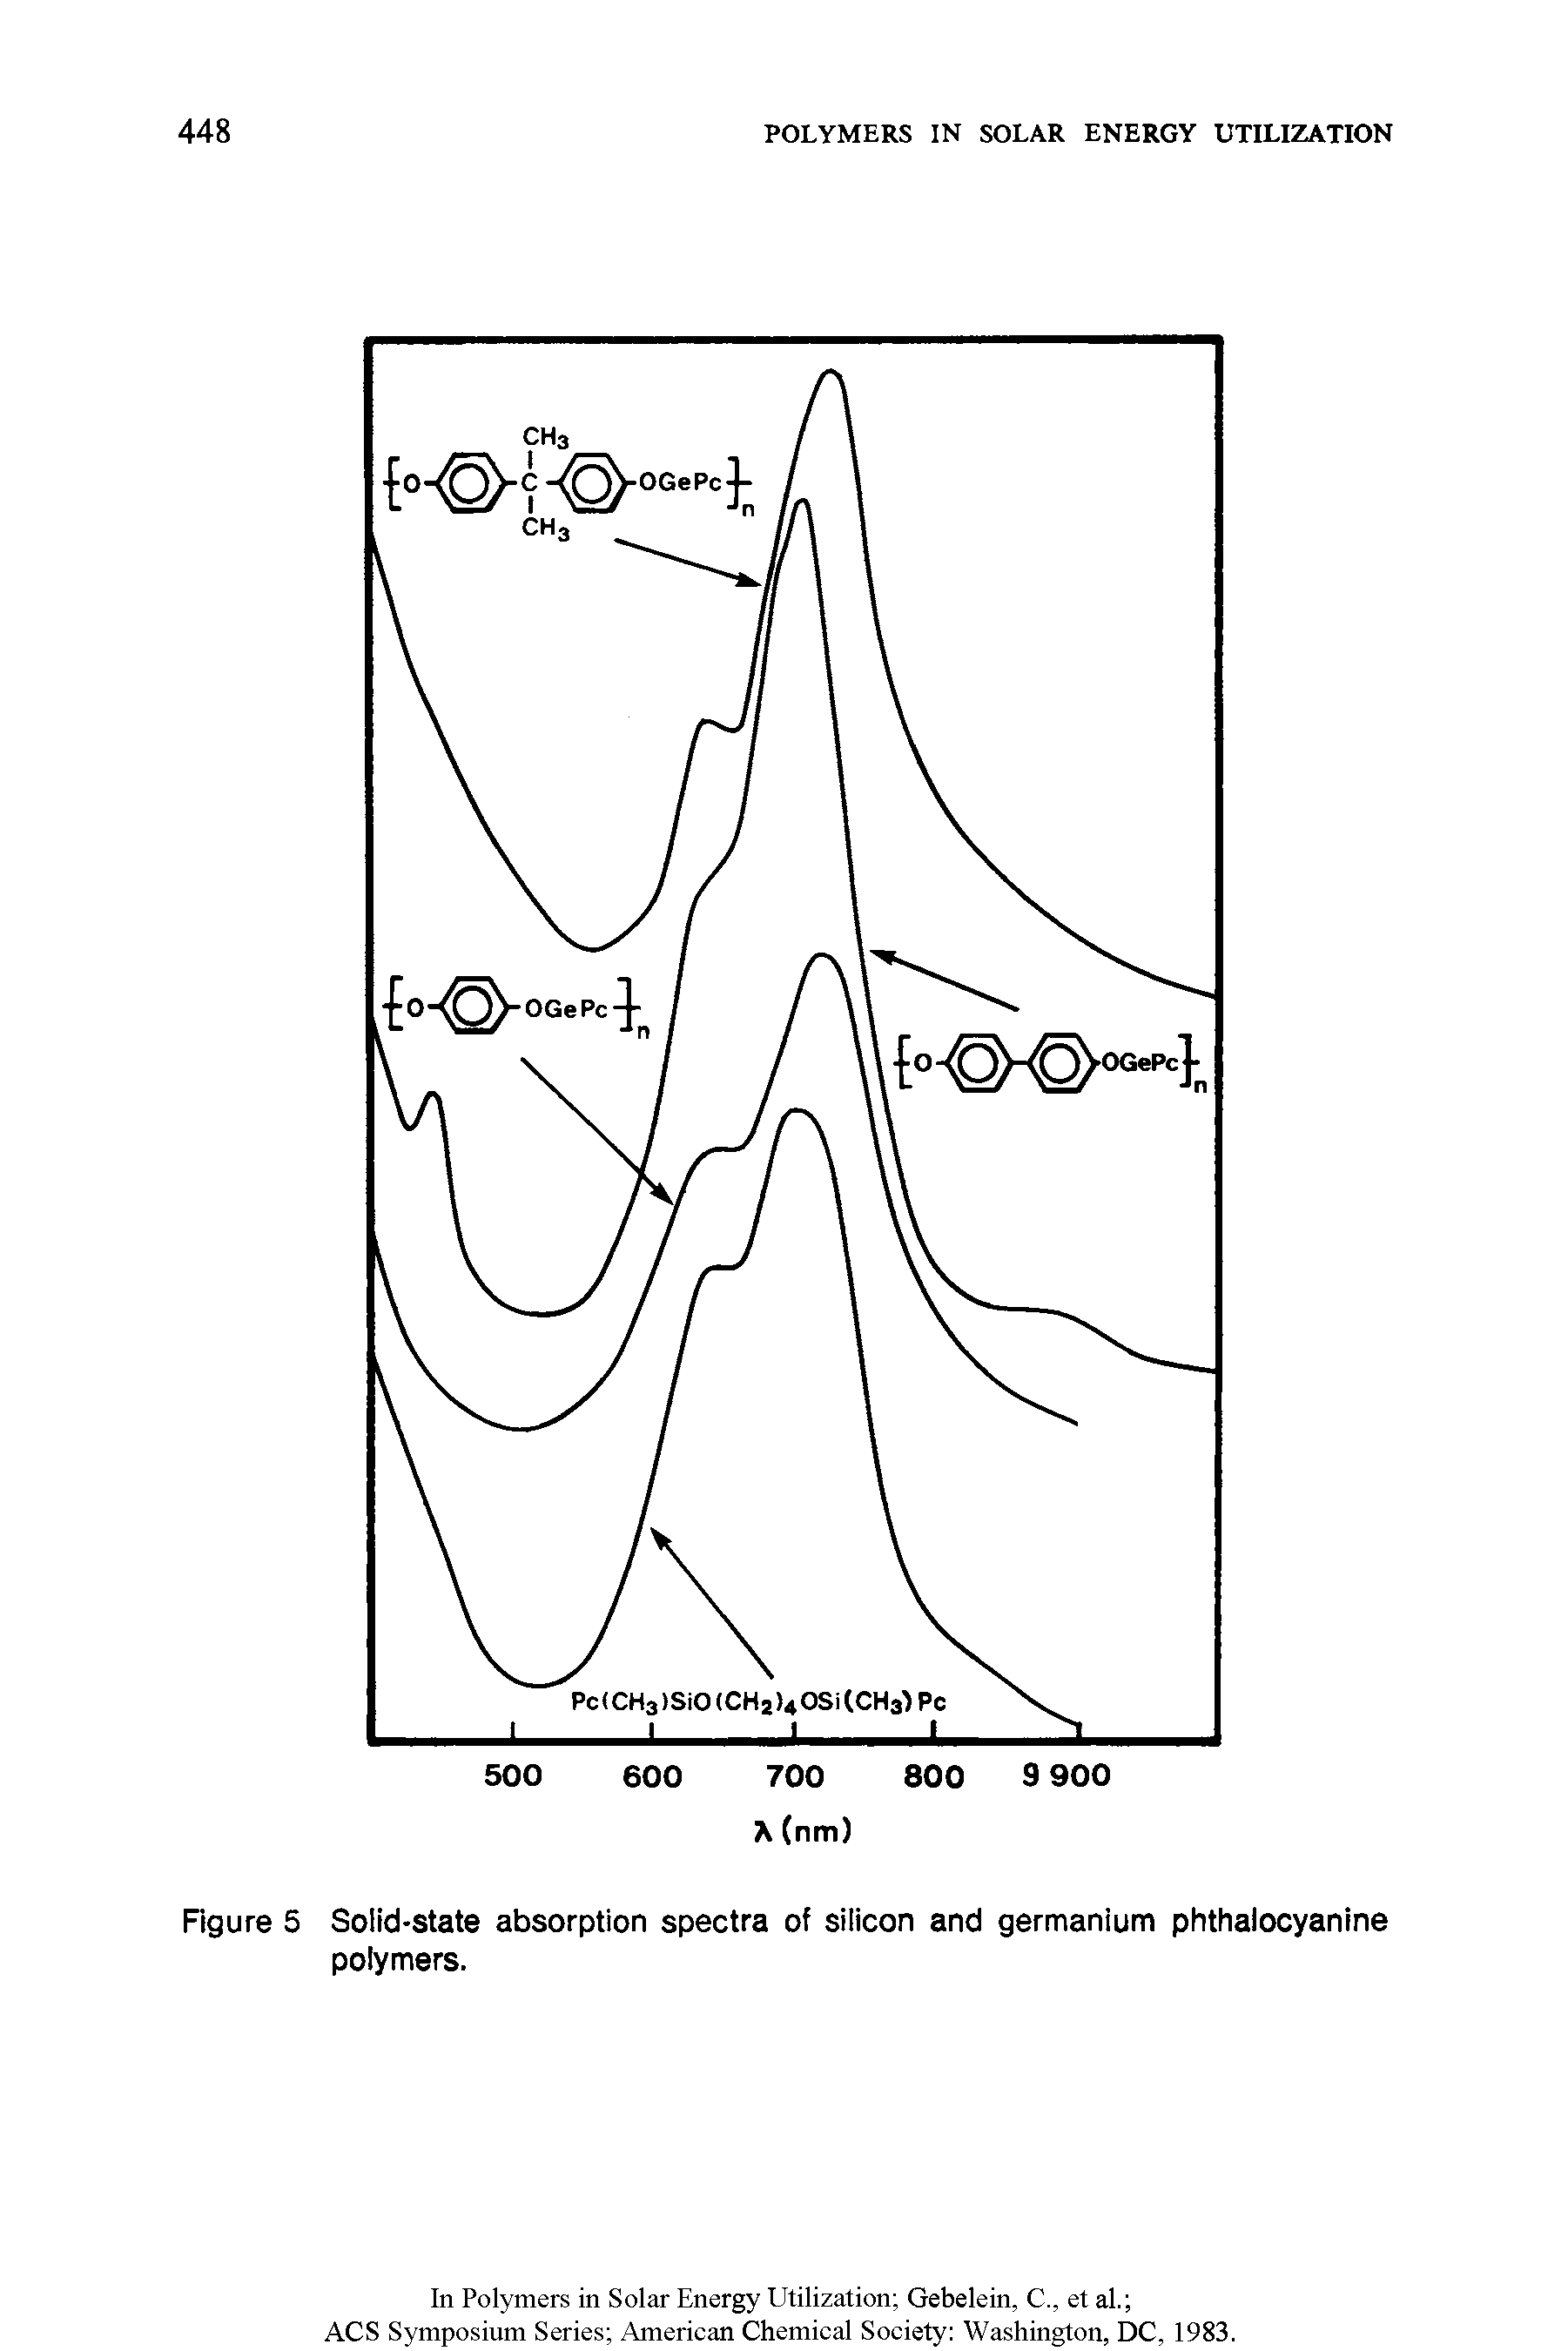 Figure 5 Solid-state absorption spectra of silicon and germanium phthalocyanine polymers.